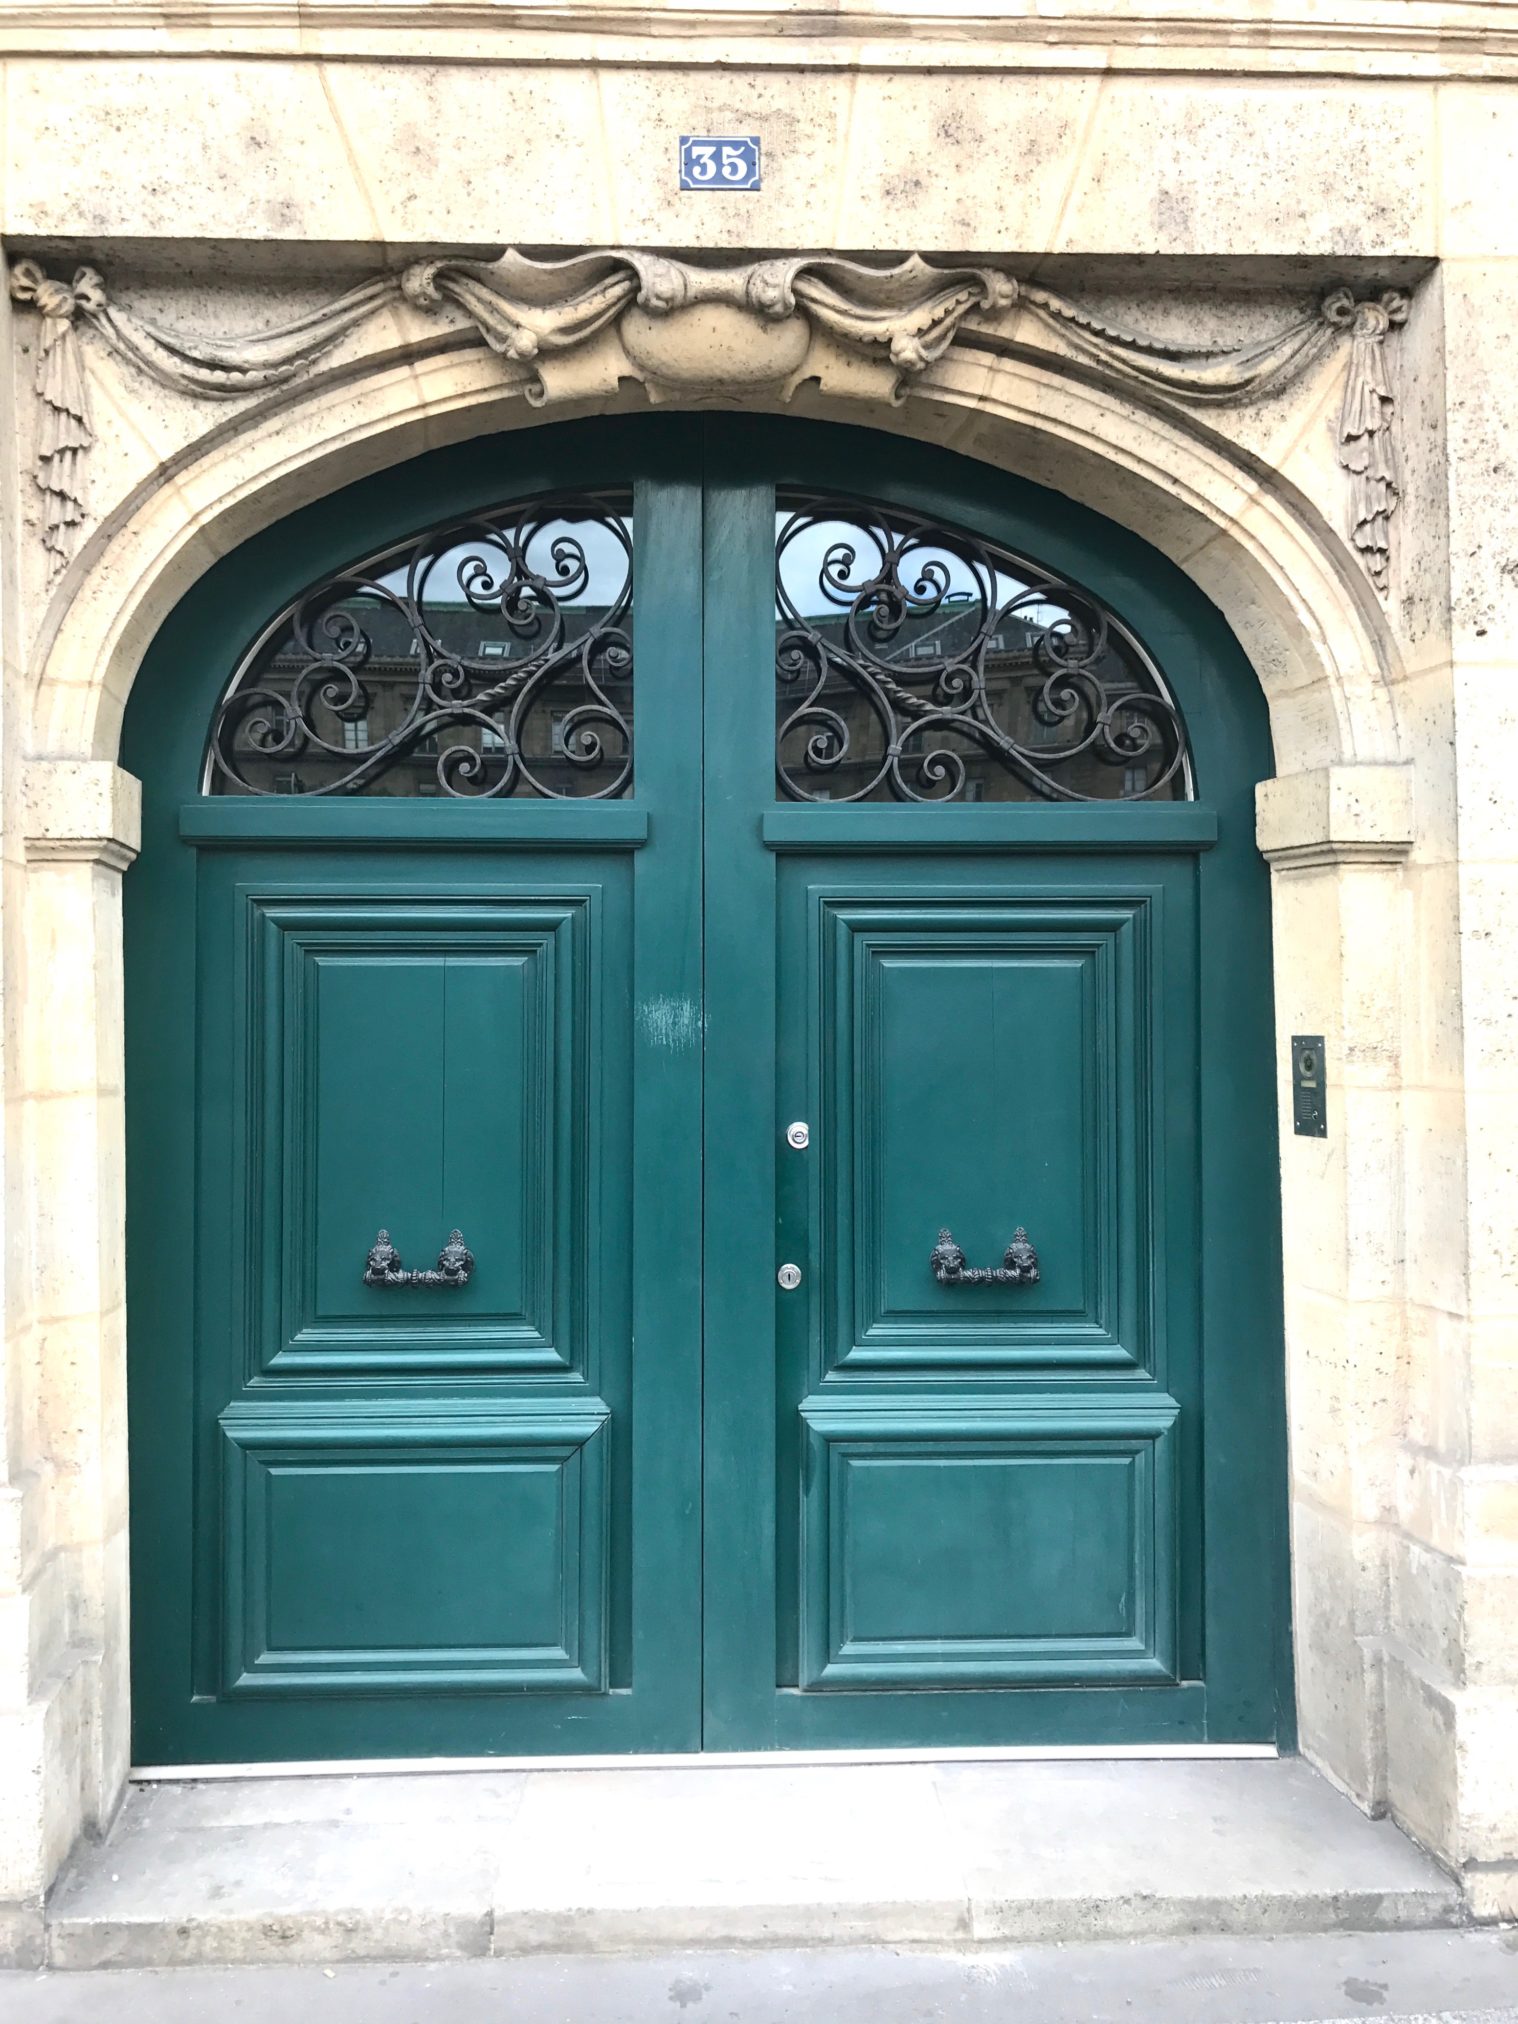 After traveling to Paris I fell in love with the colorful and gorgeous doors, to see more inspirational front doors from the streets of paris head over to www.homewithkeki.com #interiors #travel #paris